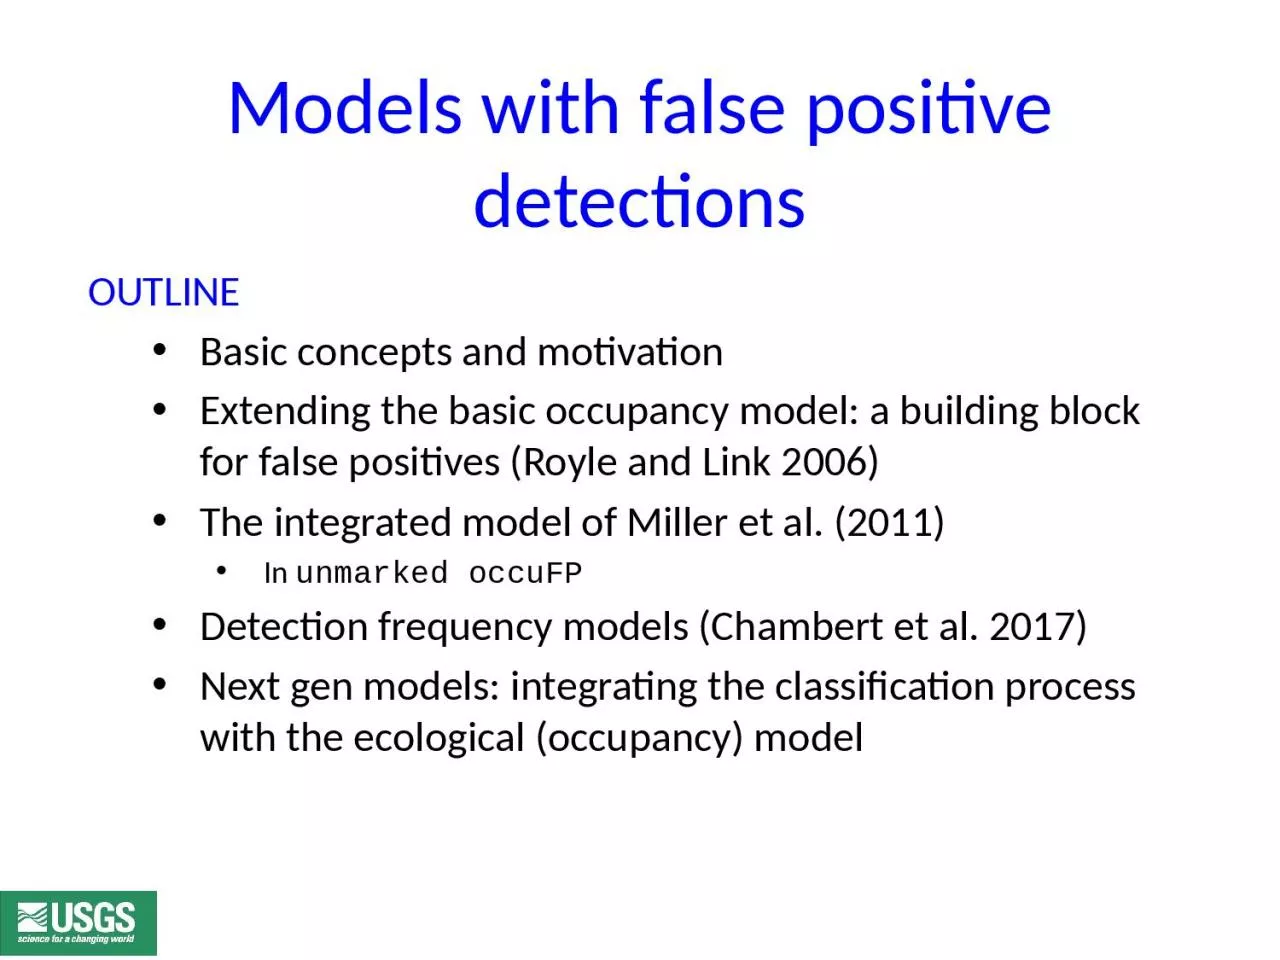 Models with false positive detections